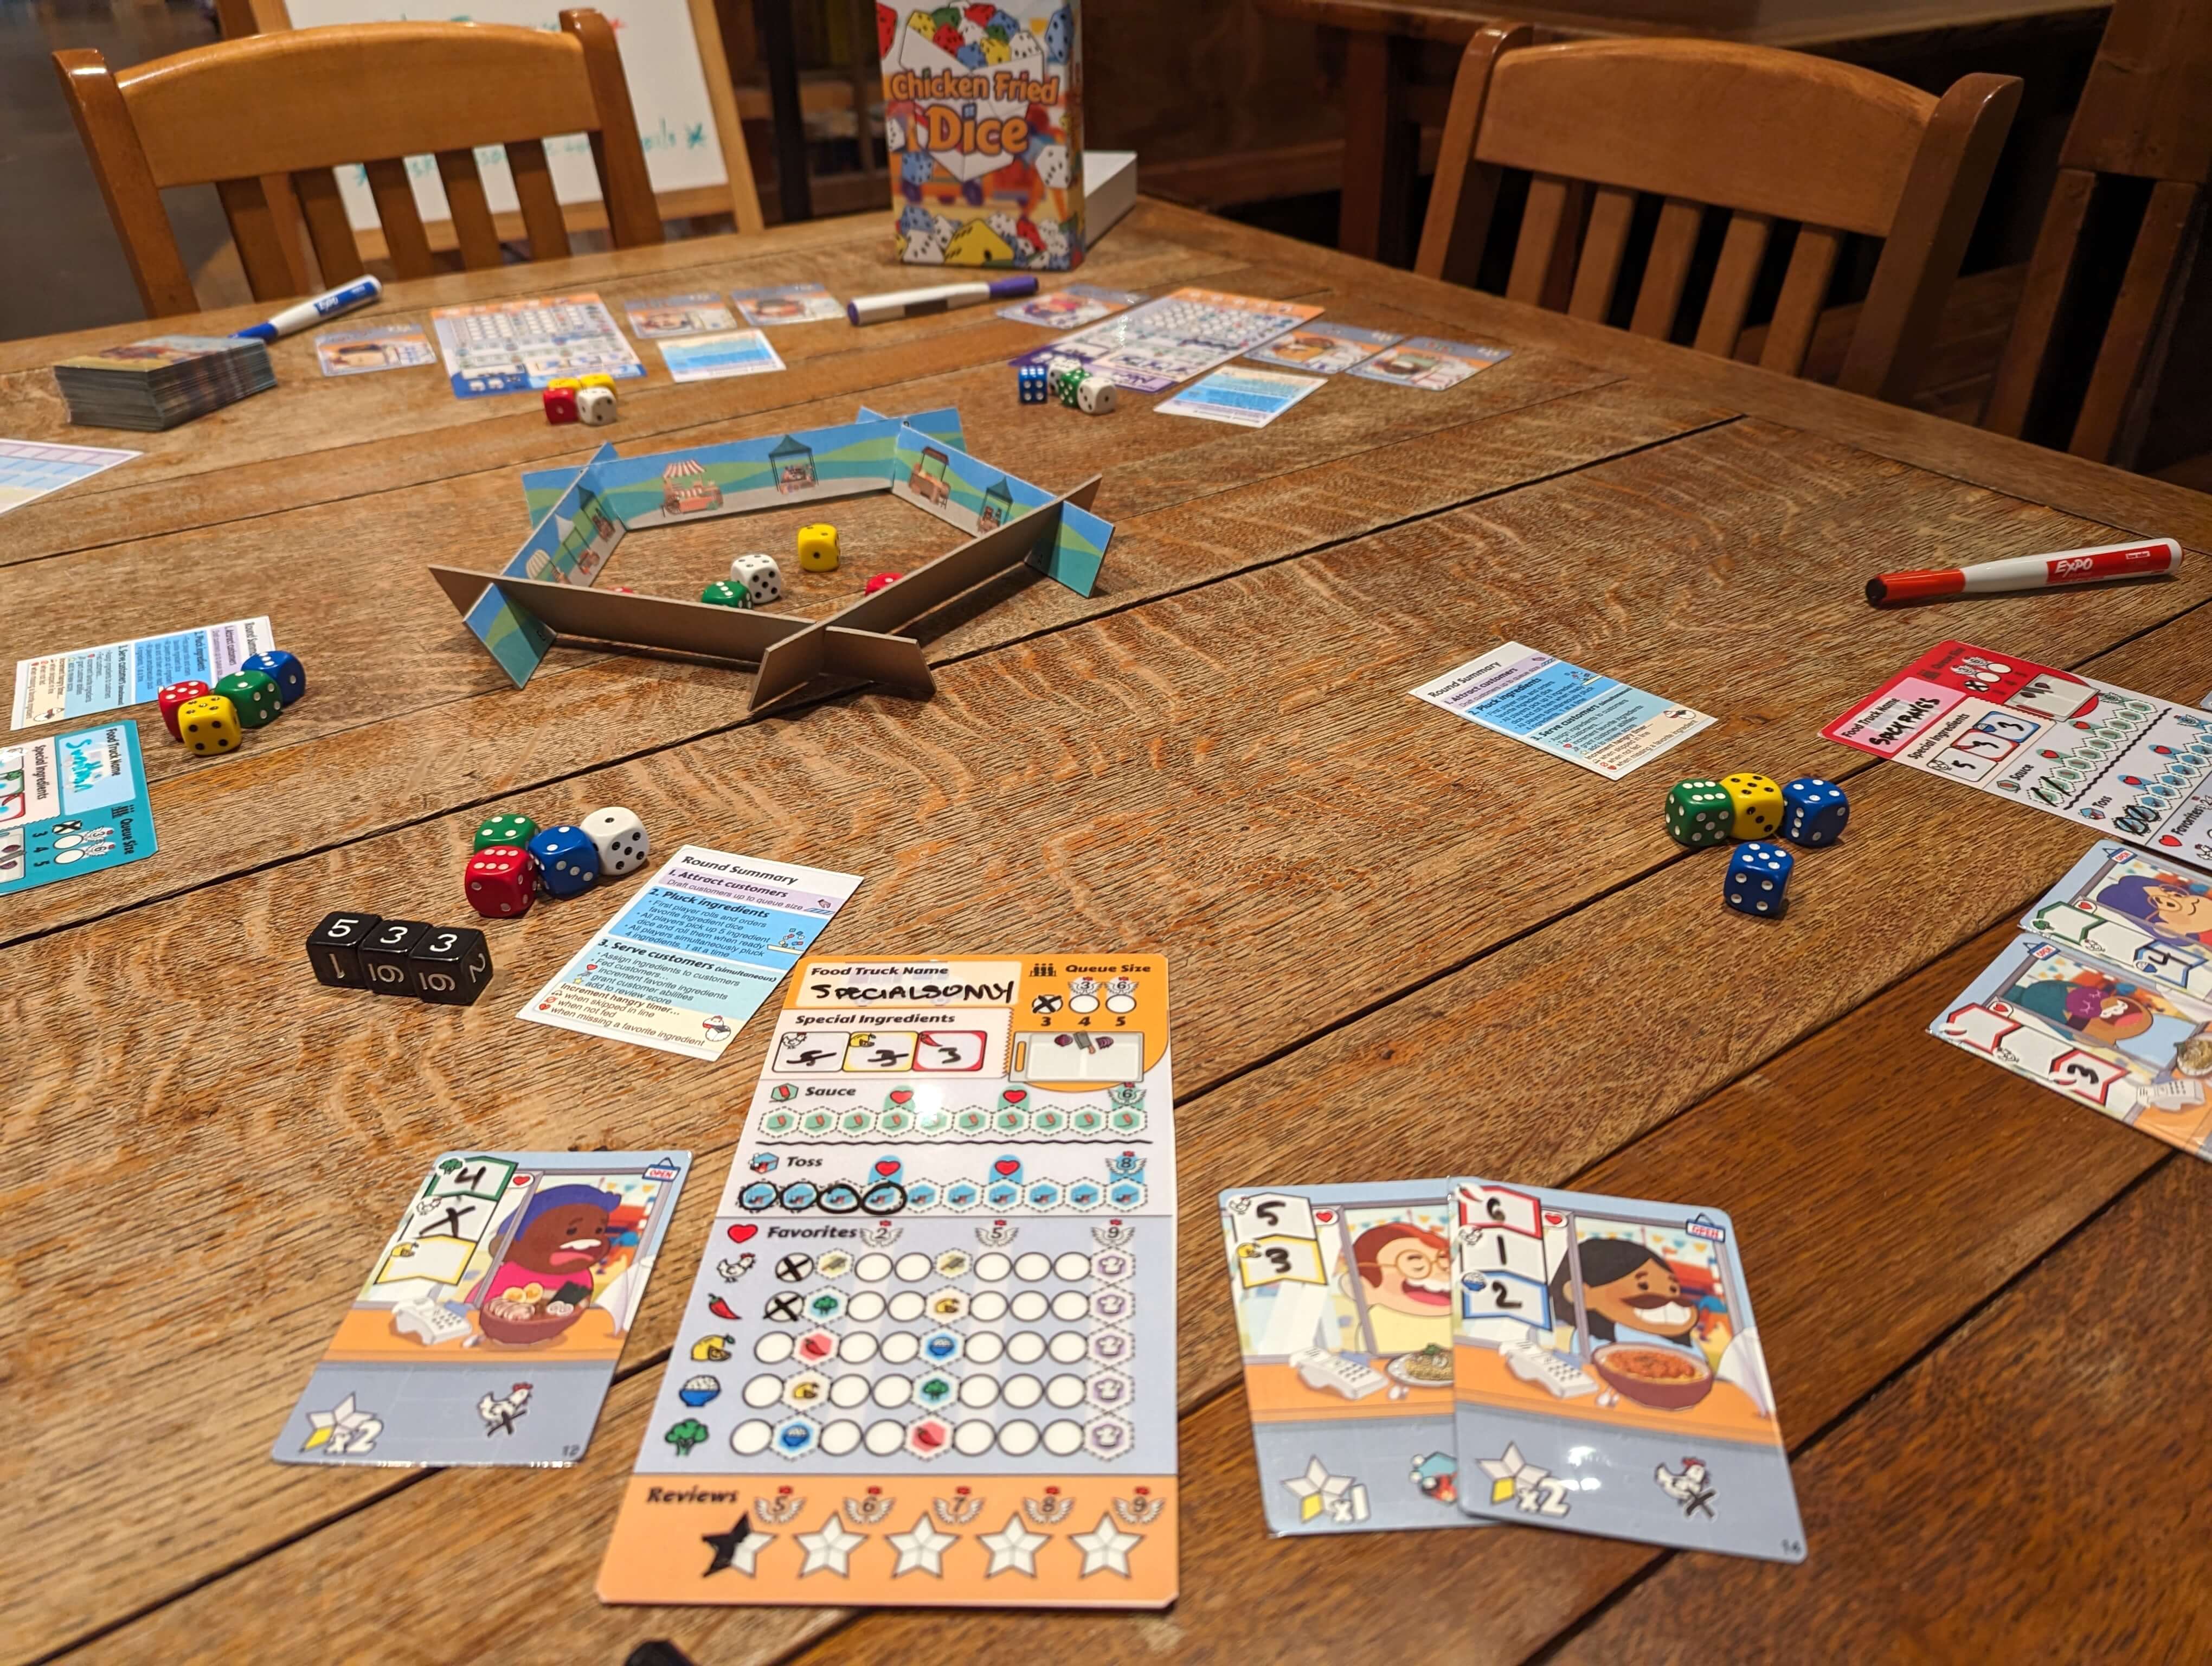 View of a game in progress where players are feeding customers